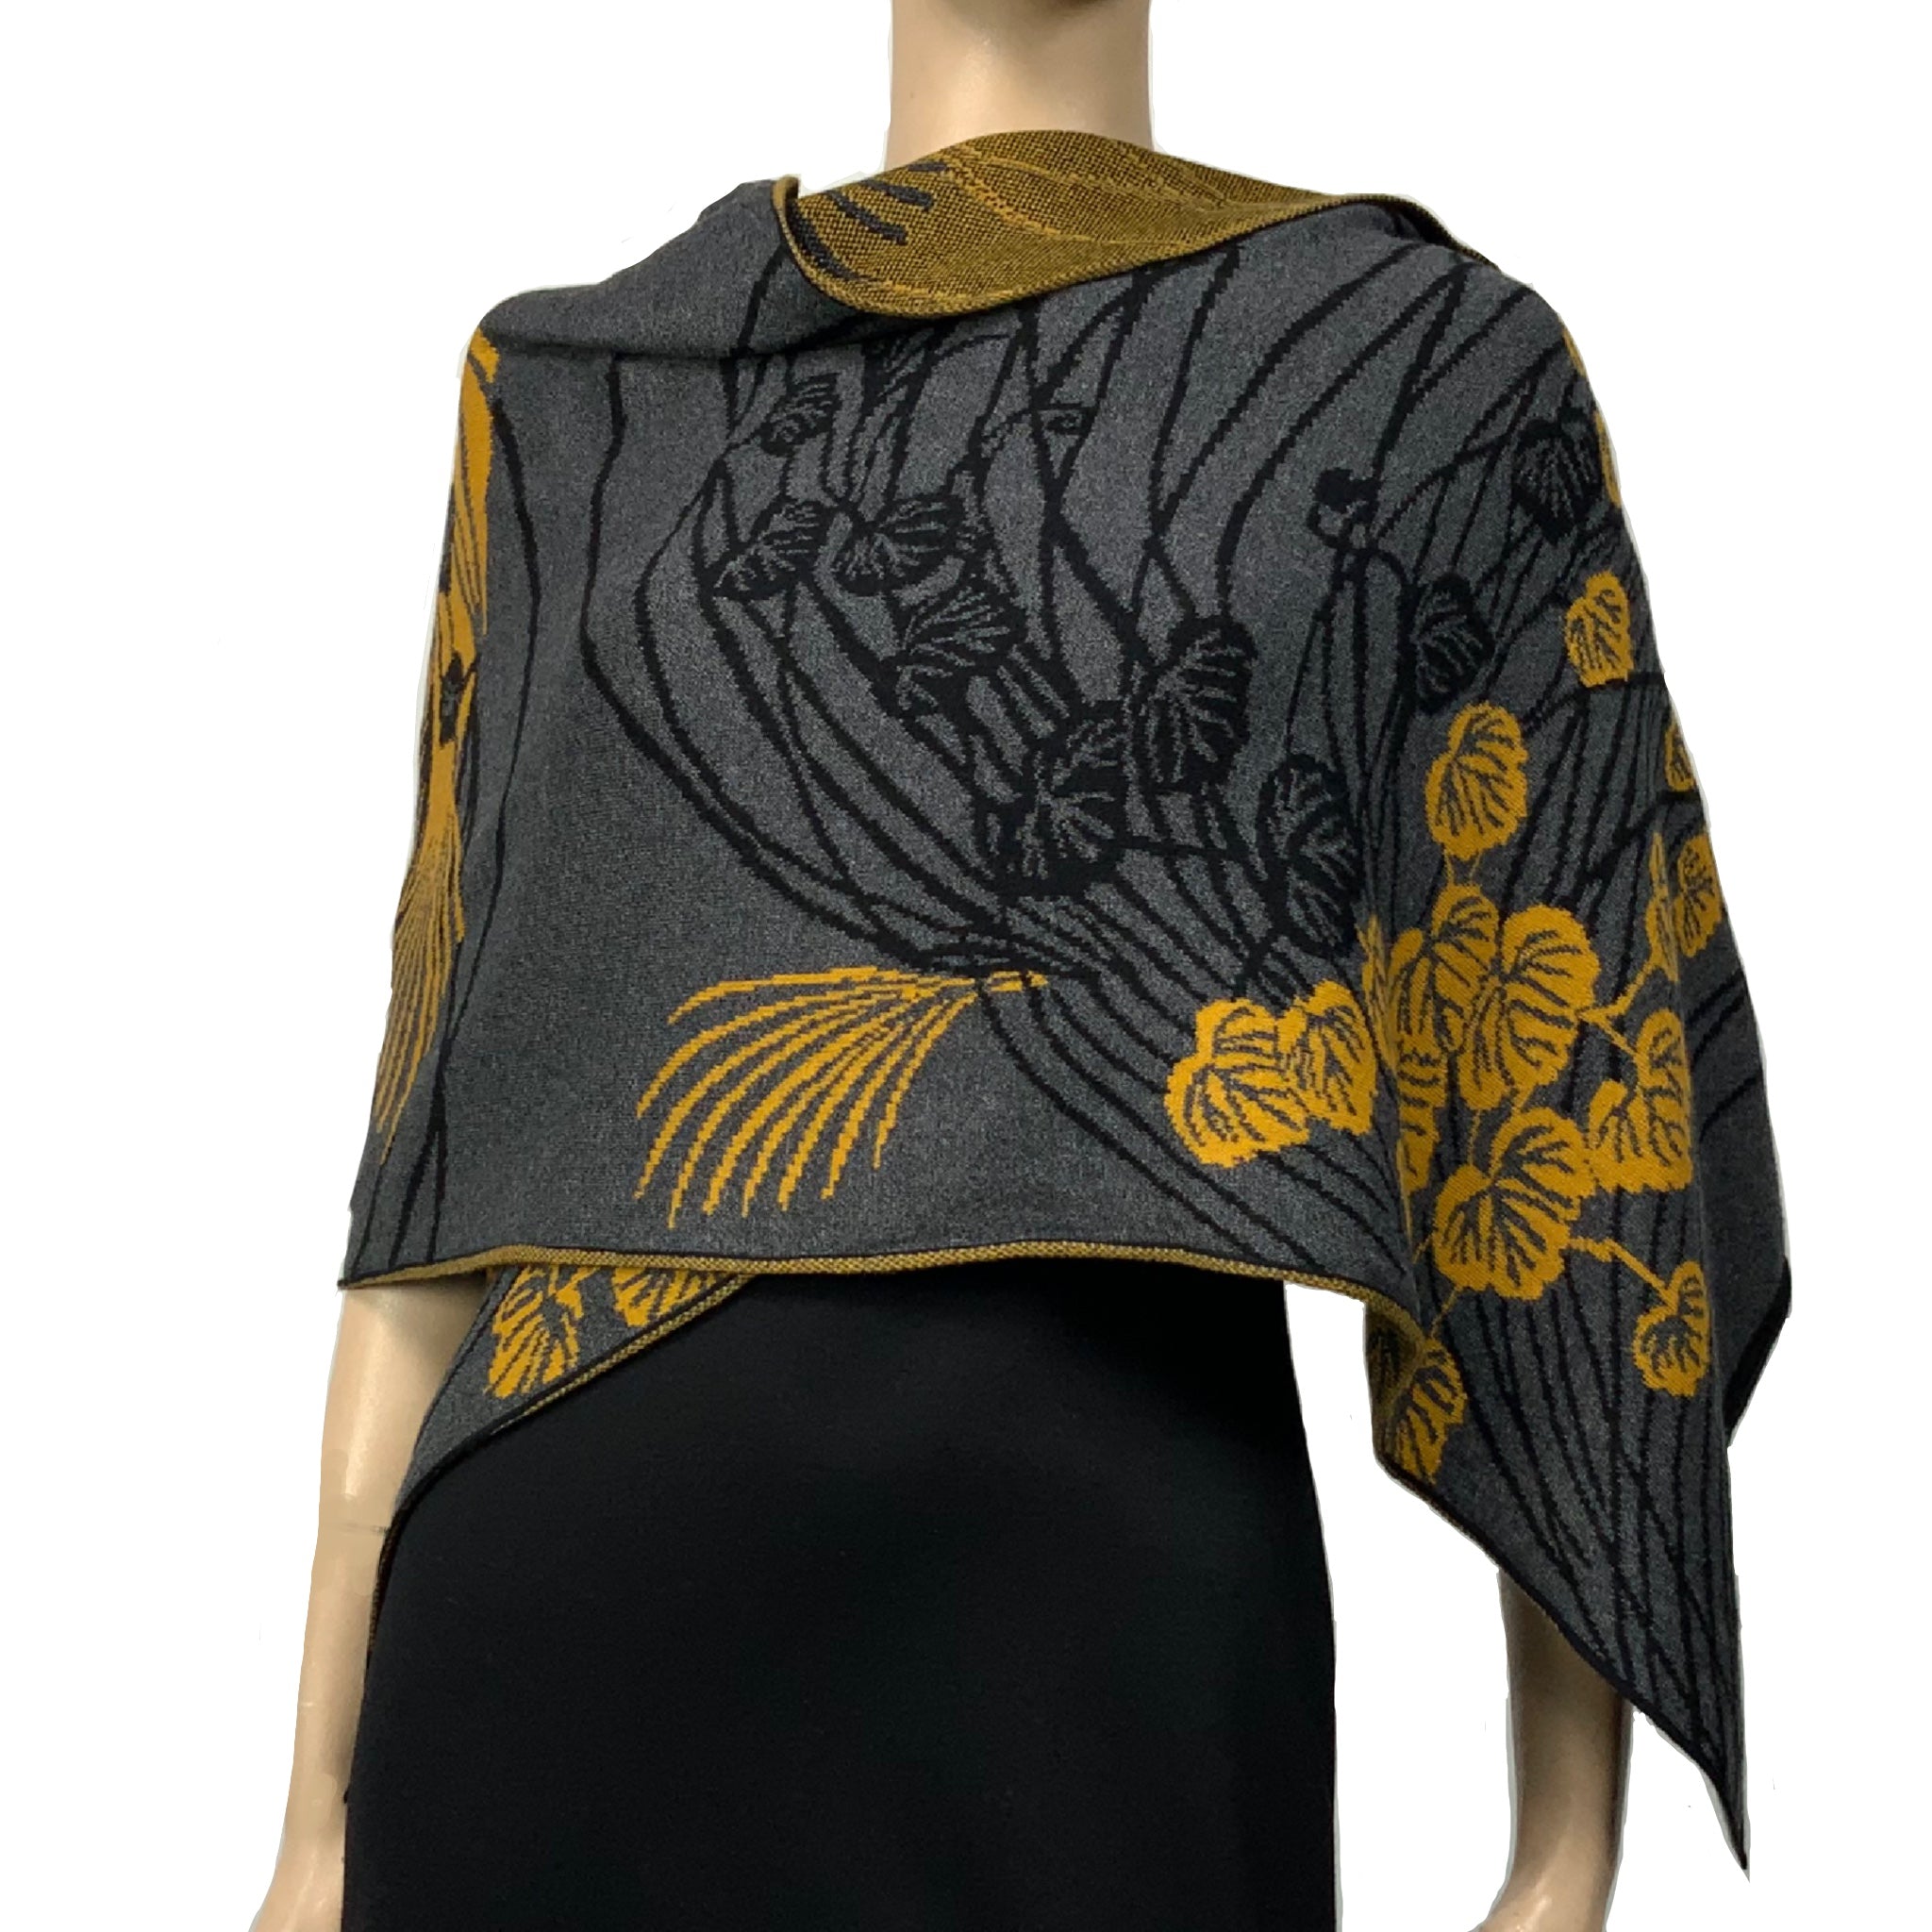 Moonscape Shawl Scarf Wrap Charcoal, Black, Gold